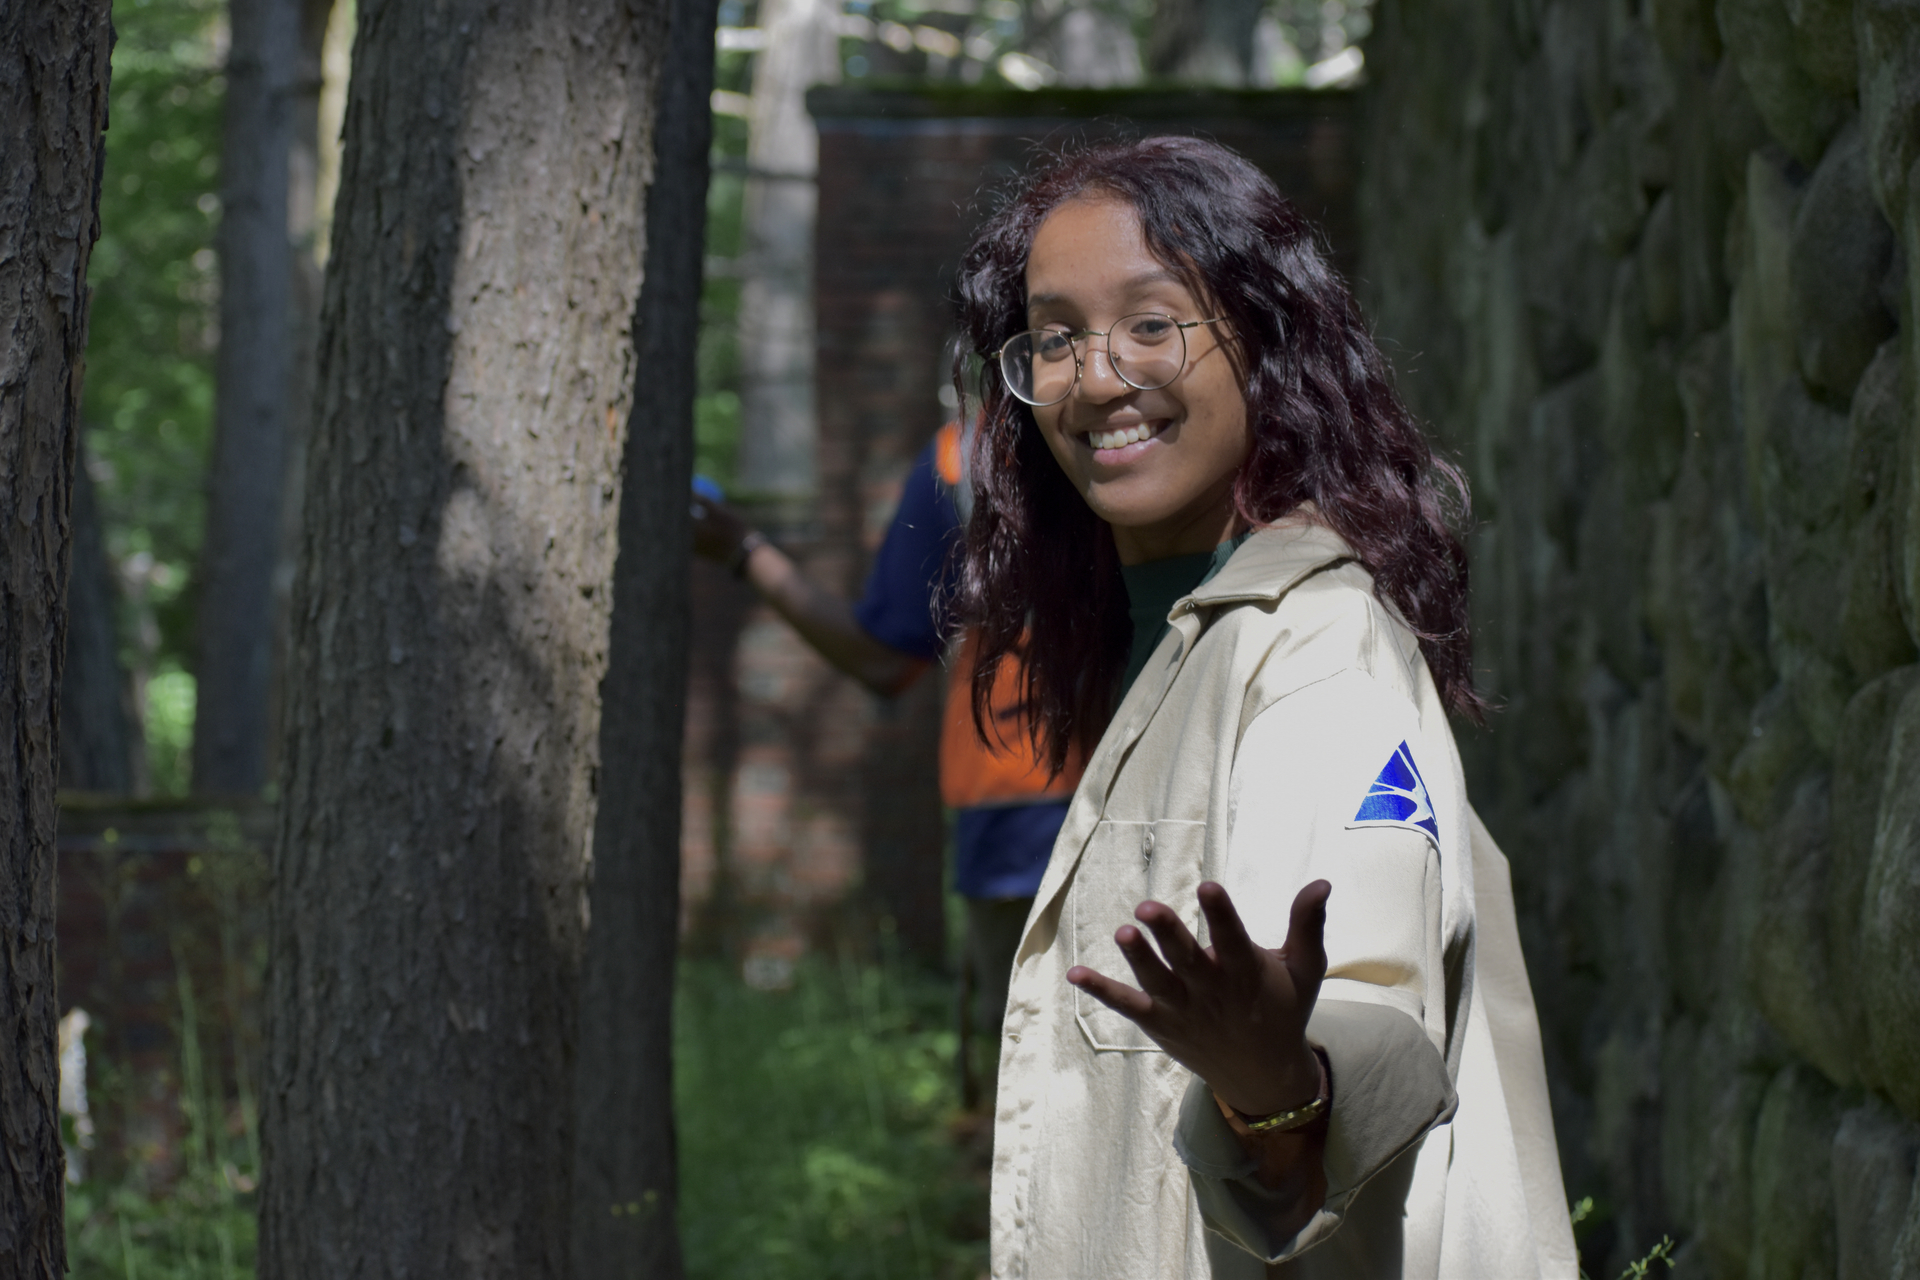 A girl with glasses wearing a tan jacket stands with her arm outstretched towards the camera. She is in a forest.